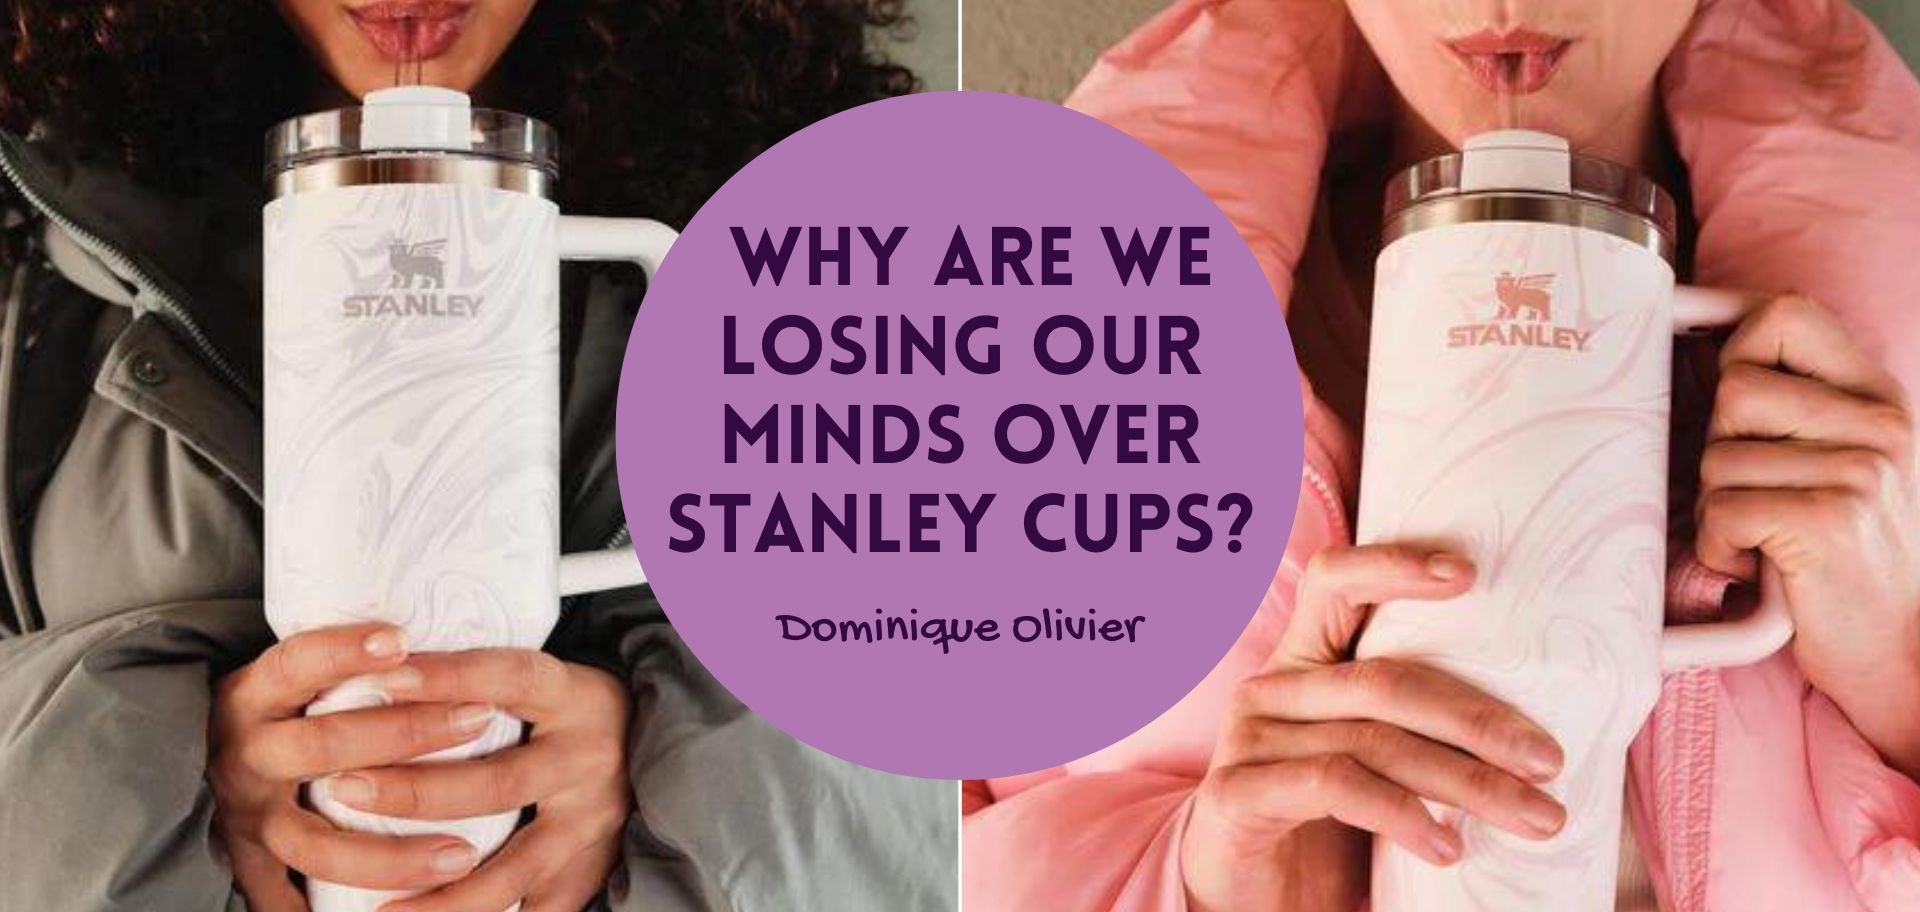 Why are we losing our minds over Stanley cups?